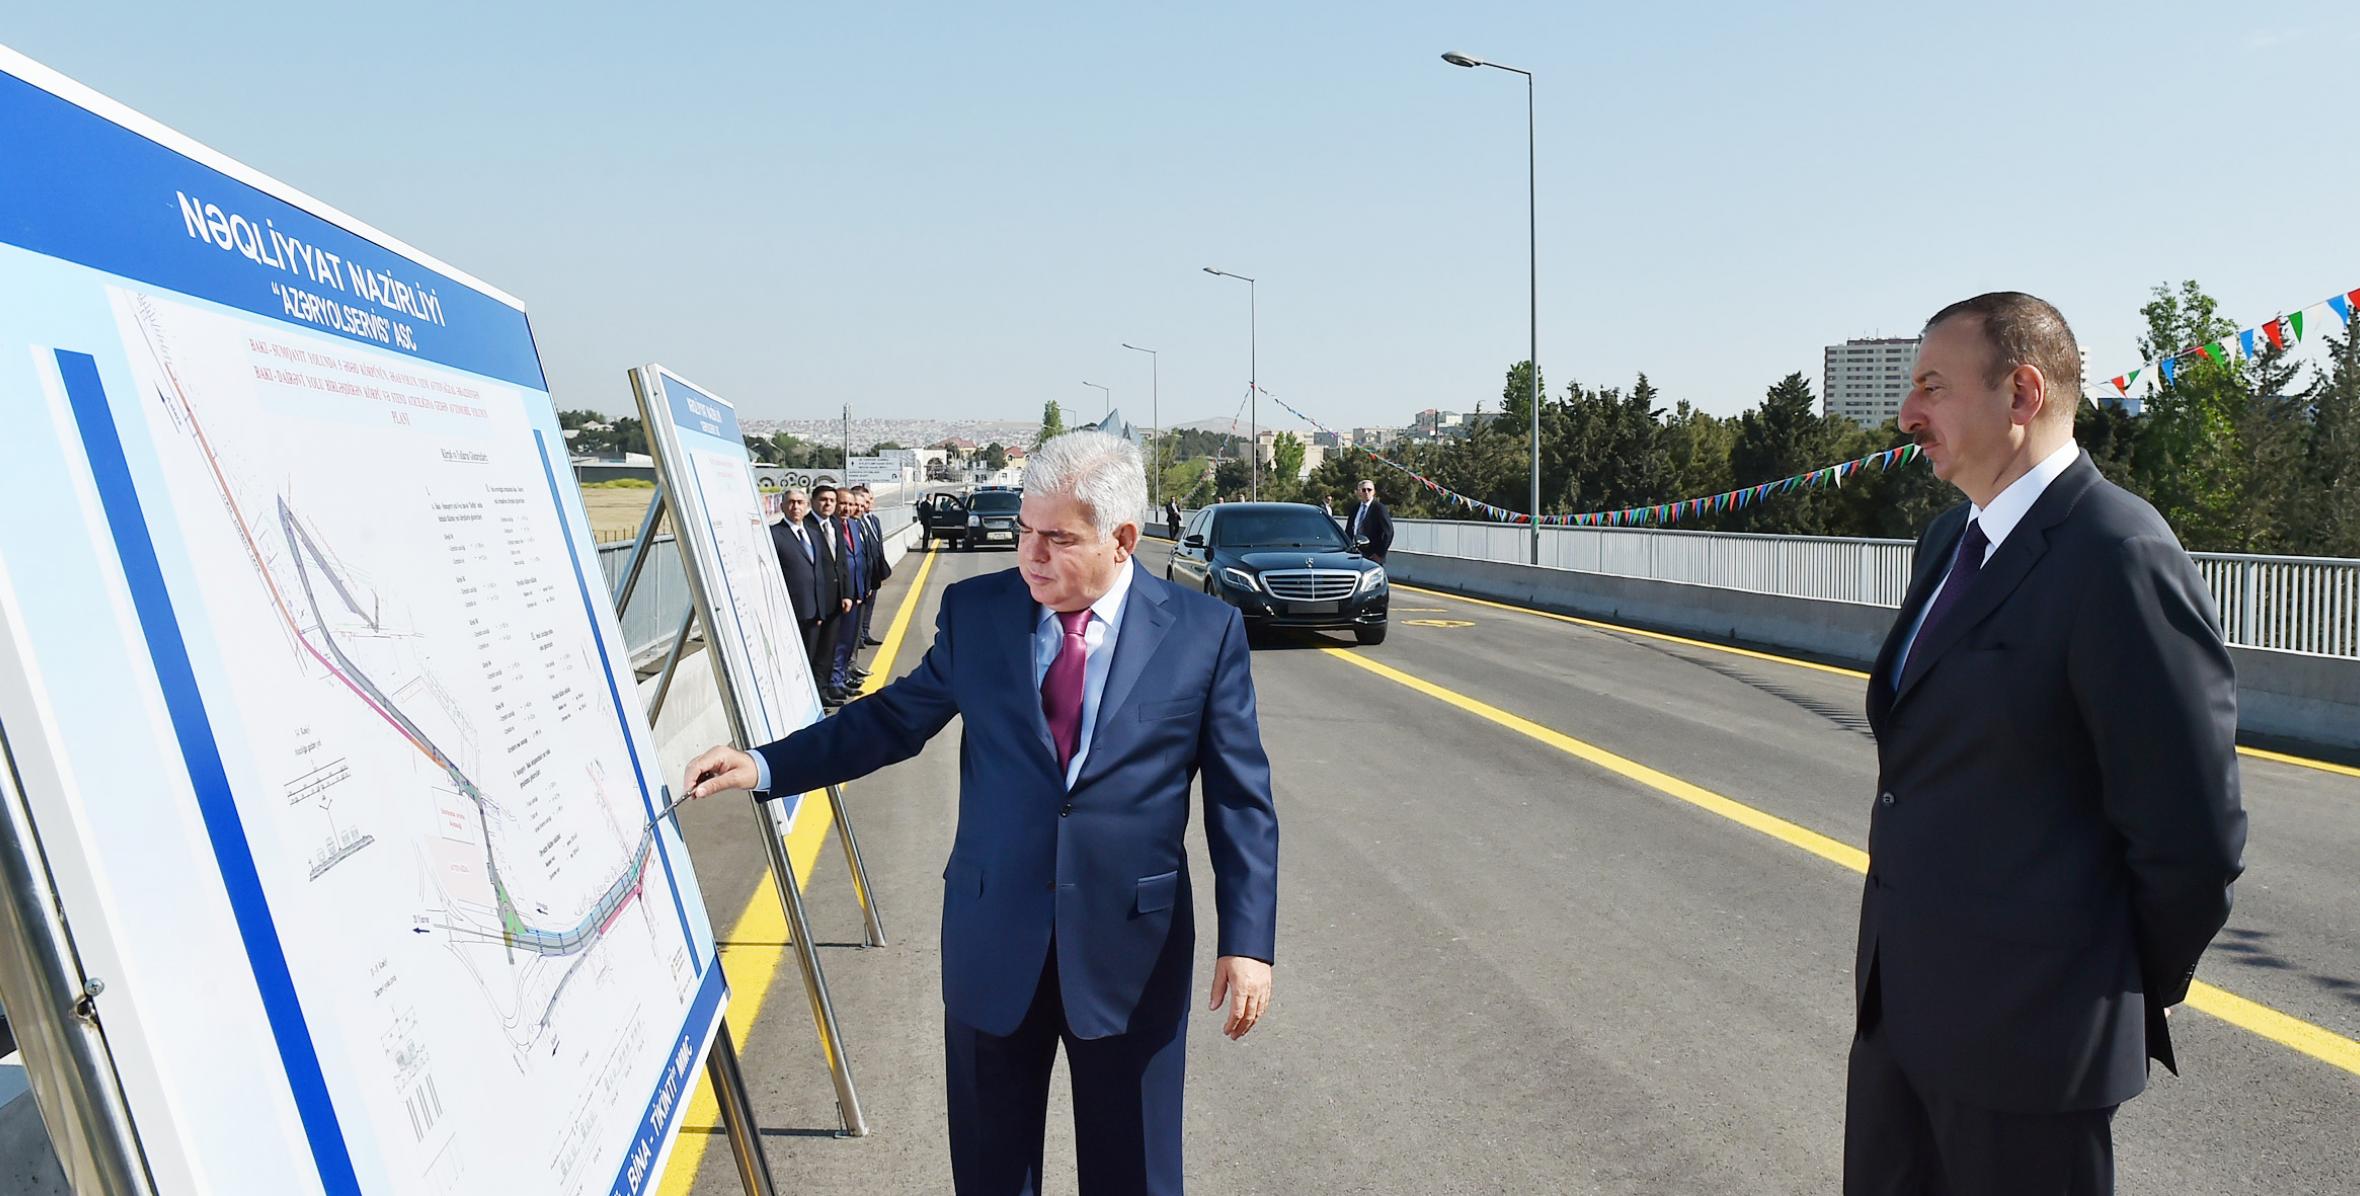 Ilham Aliyev attended the opening of the bridge connecting the Baku ring road in the area of the International Bus Station, and the road leading to the Shooting Complex